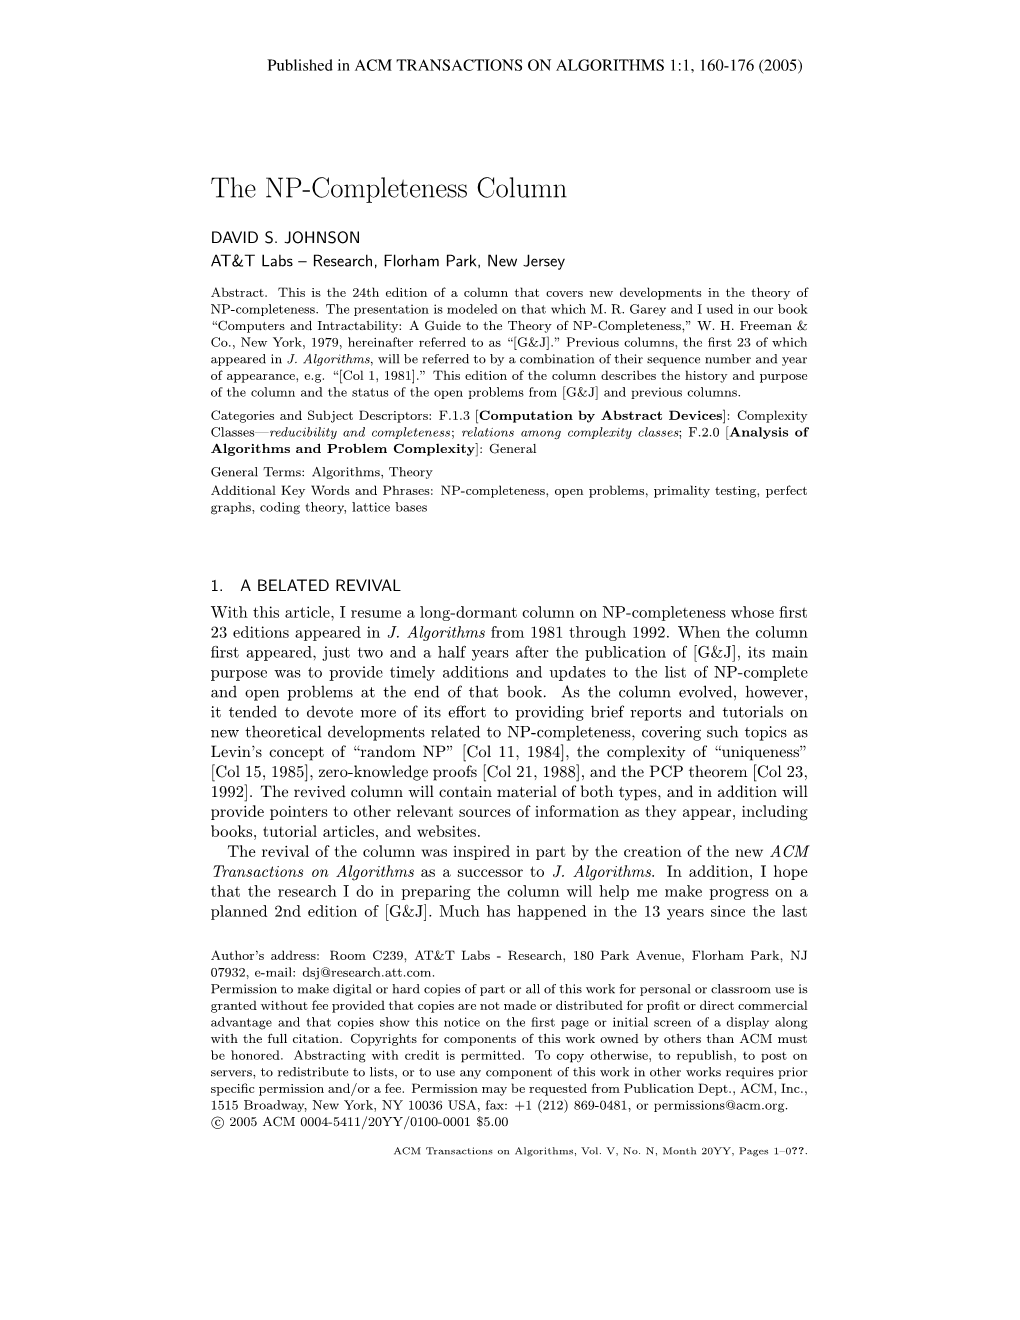 The NP-Completeness Column